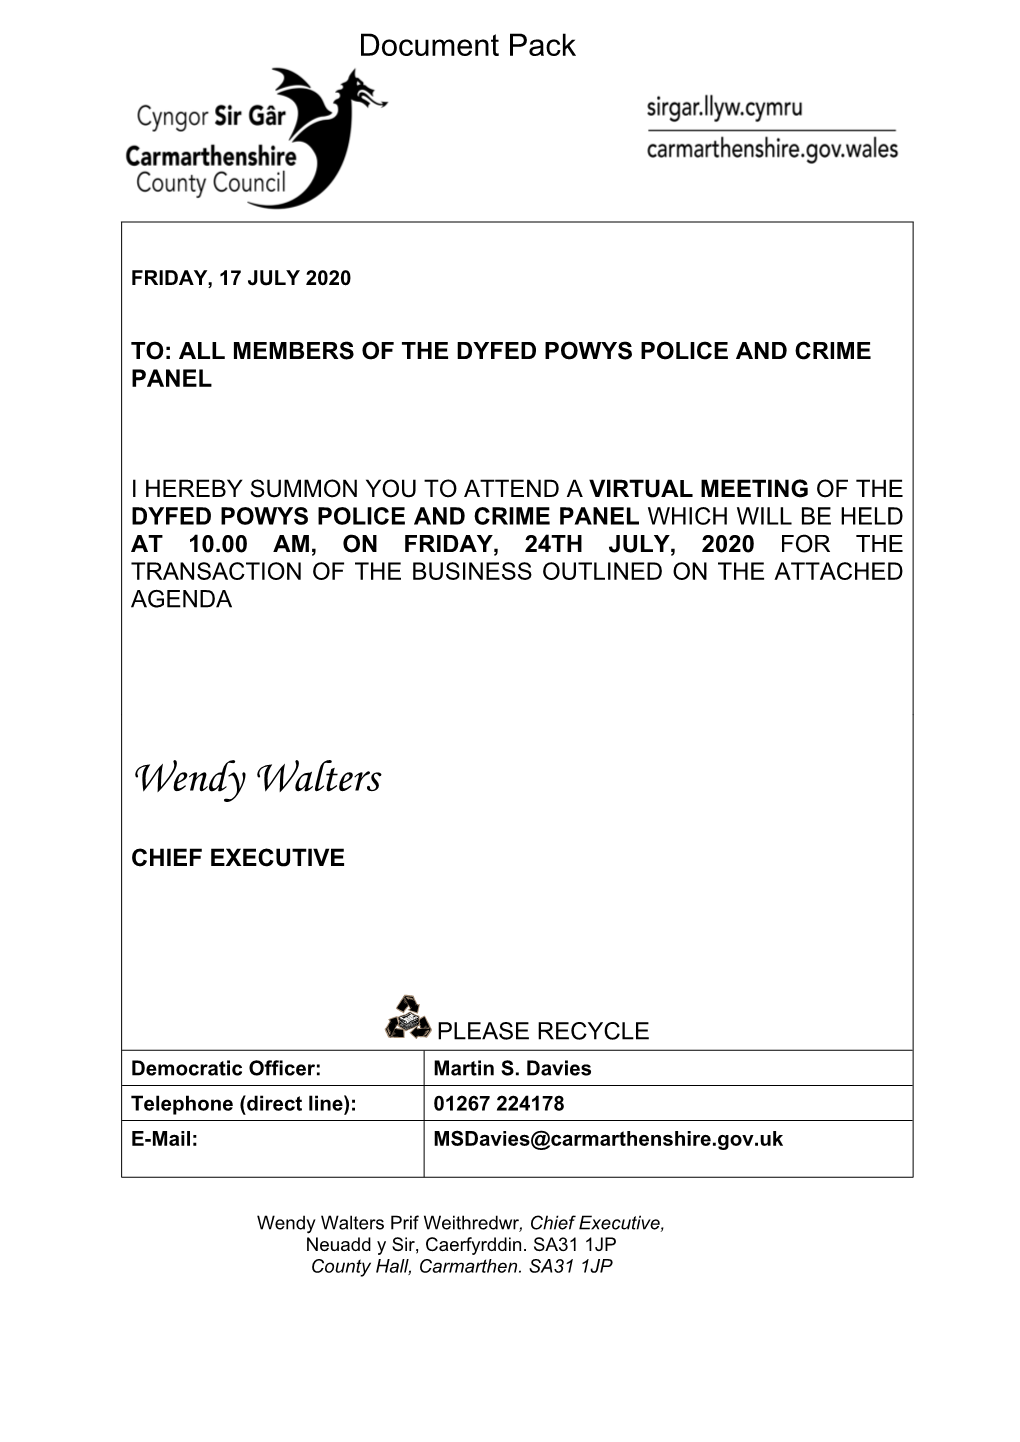 (Public Pack)Agenda Document for Dyfed Powys Police and Crime